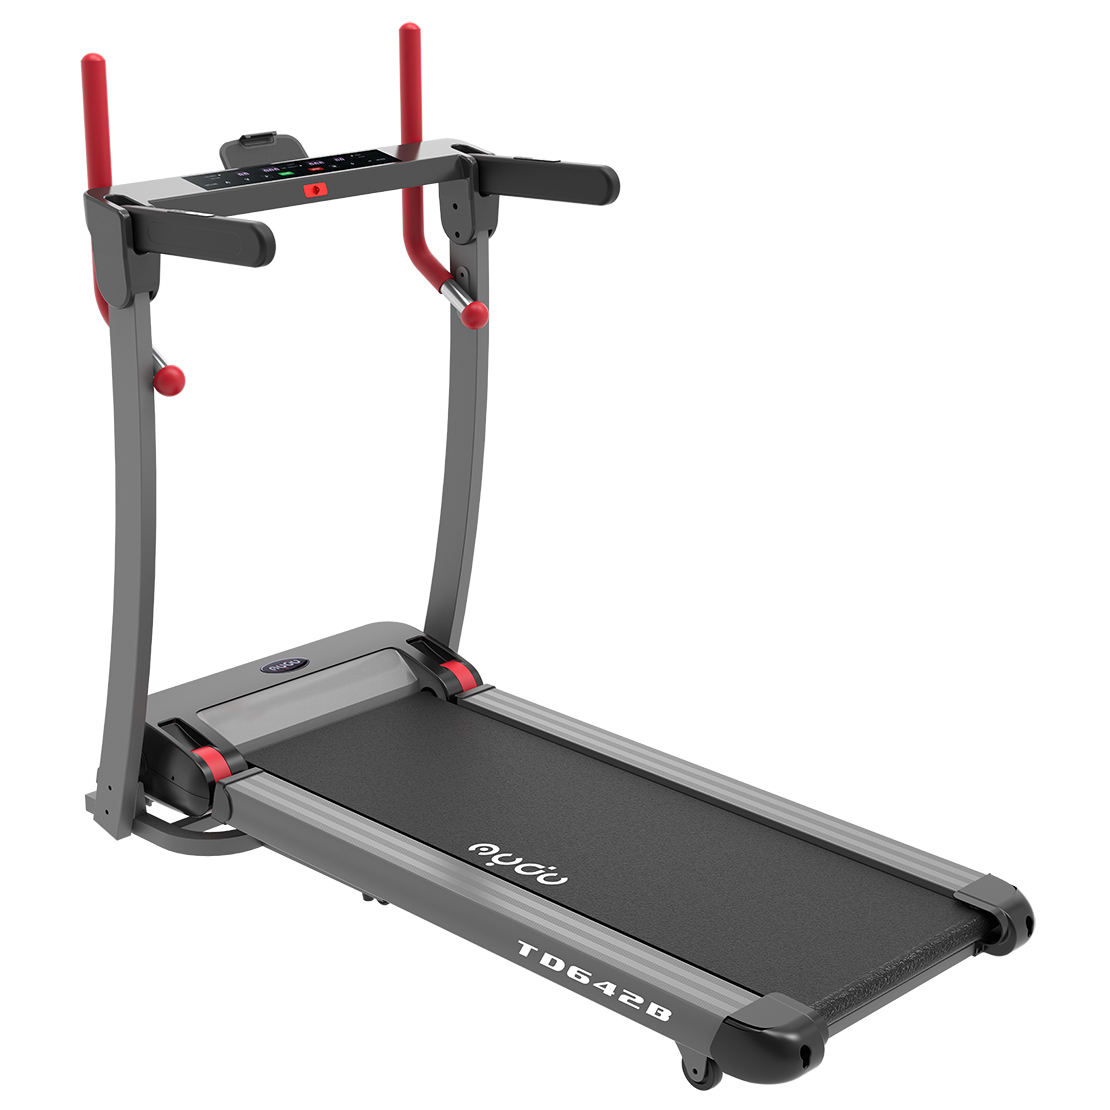 420mm Home Use Motorized Treadmill Model No.: TD 642B Featured Image